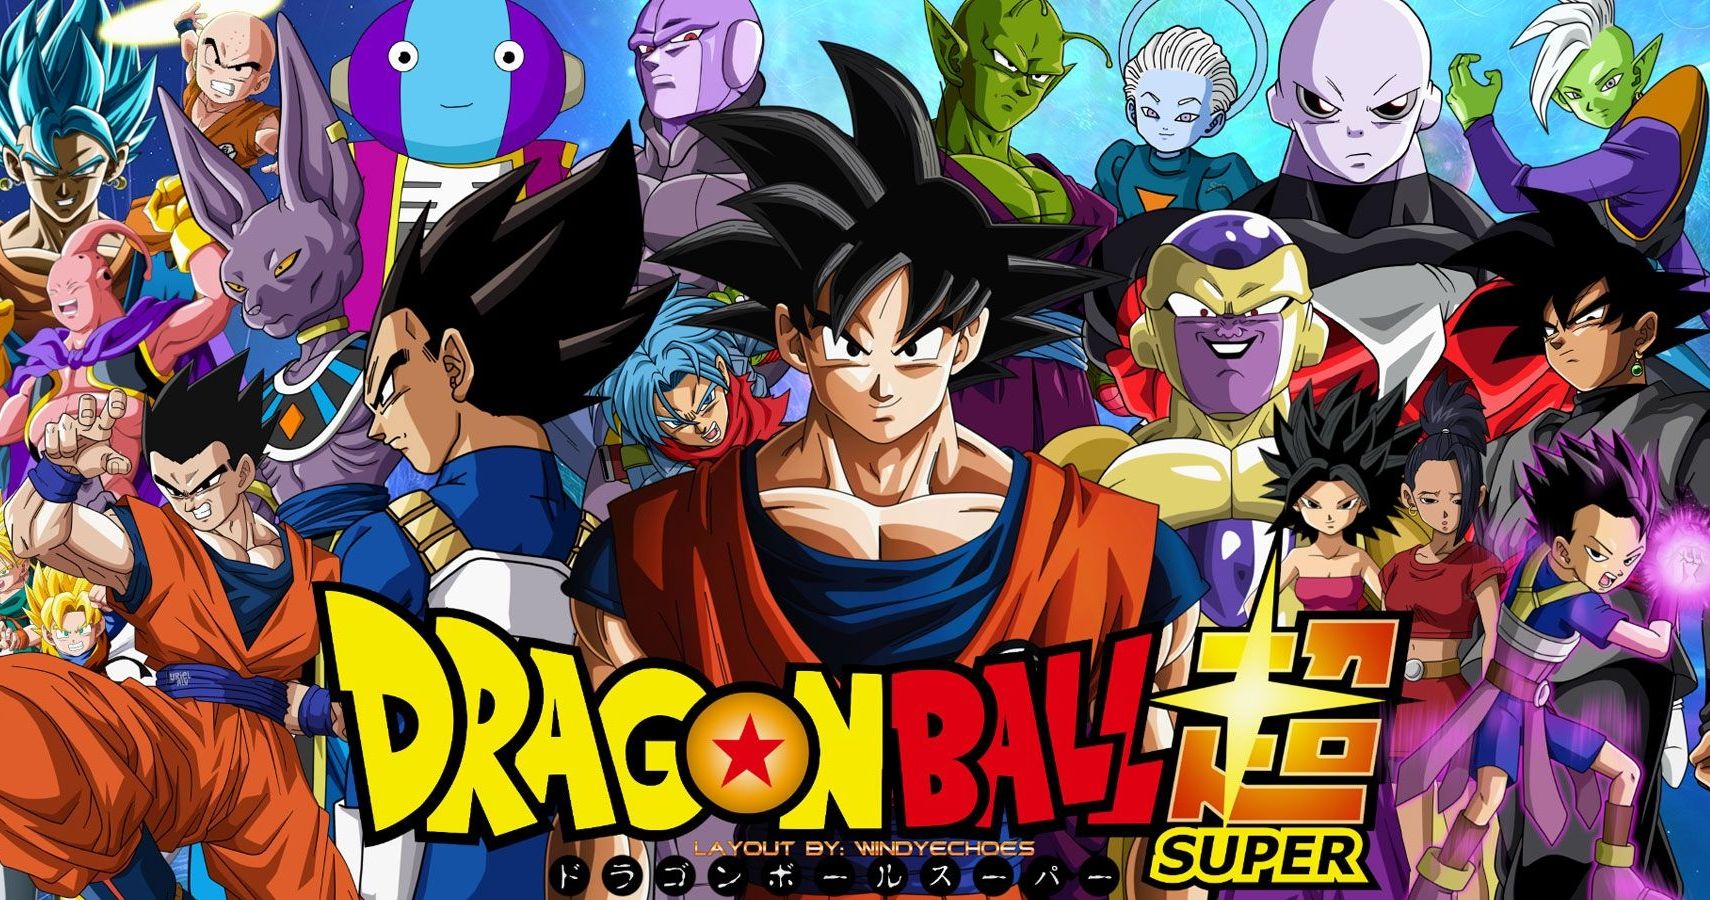 A New Dragon Ball Super Movie Confirmed For 2022 | TheGamer